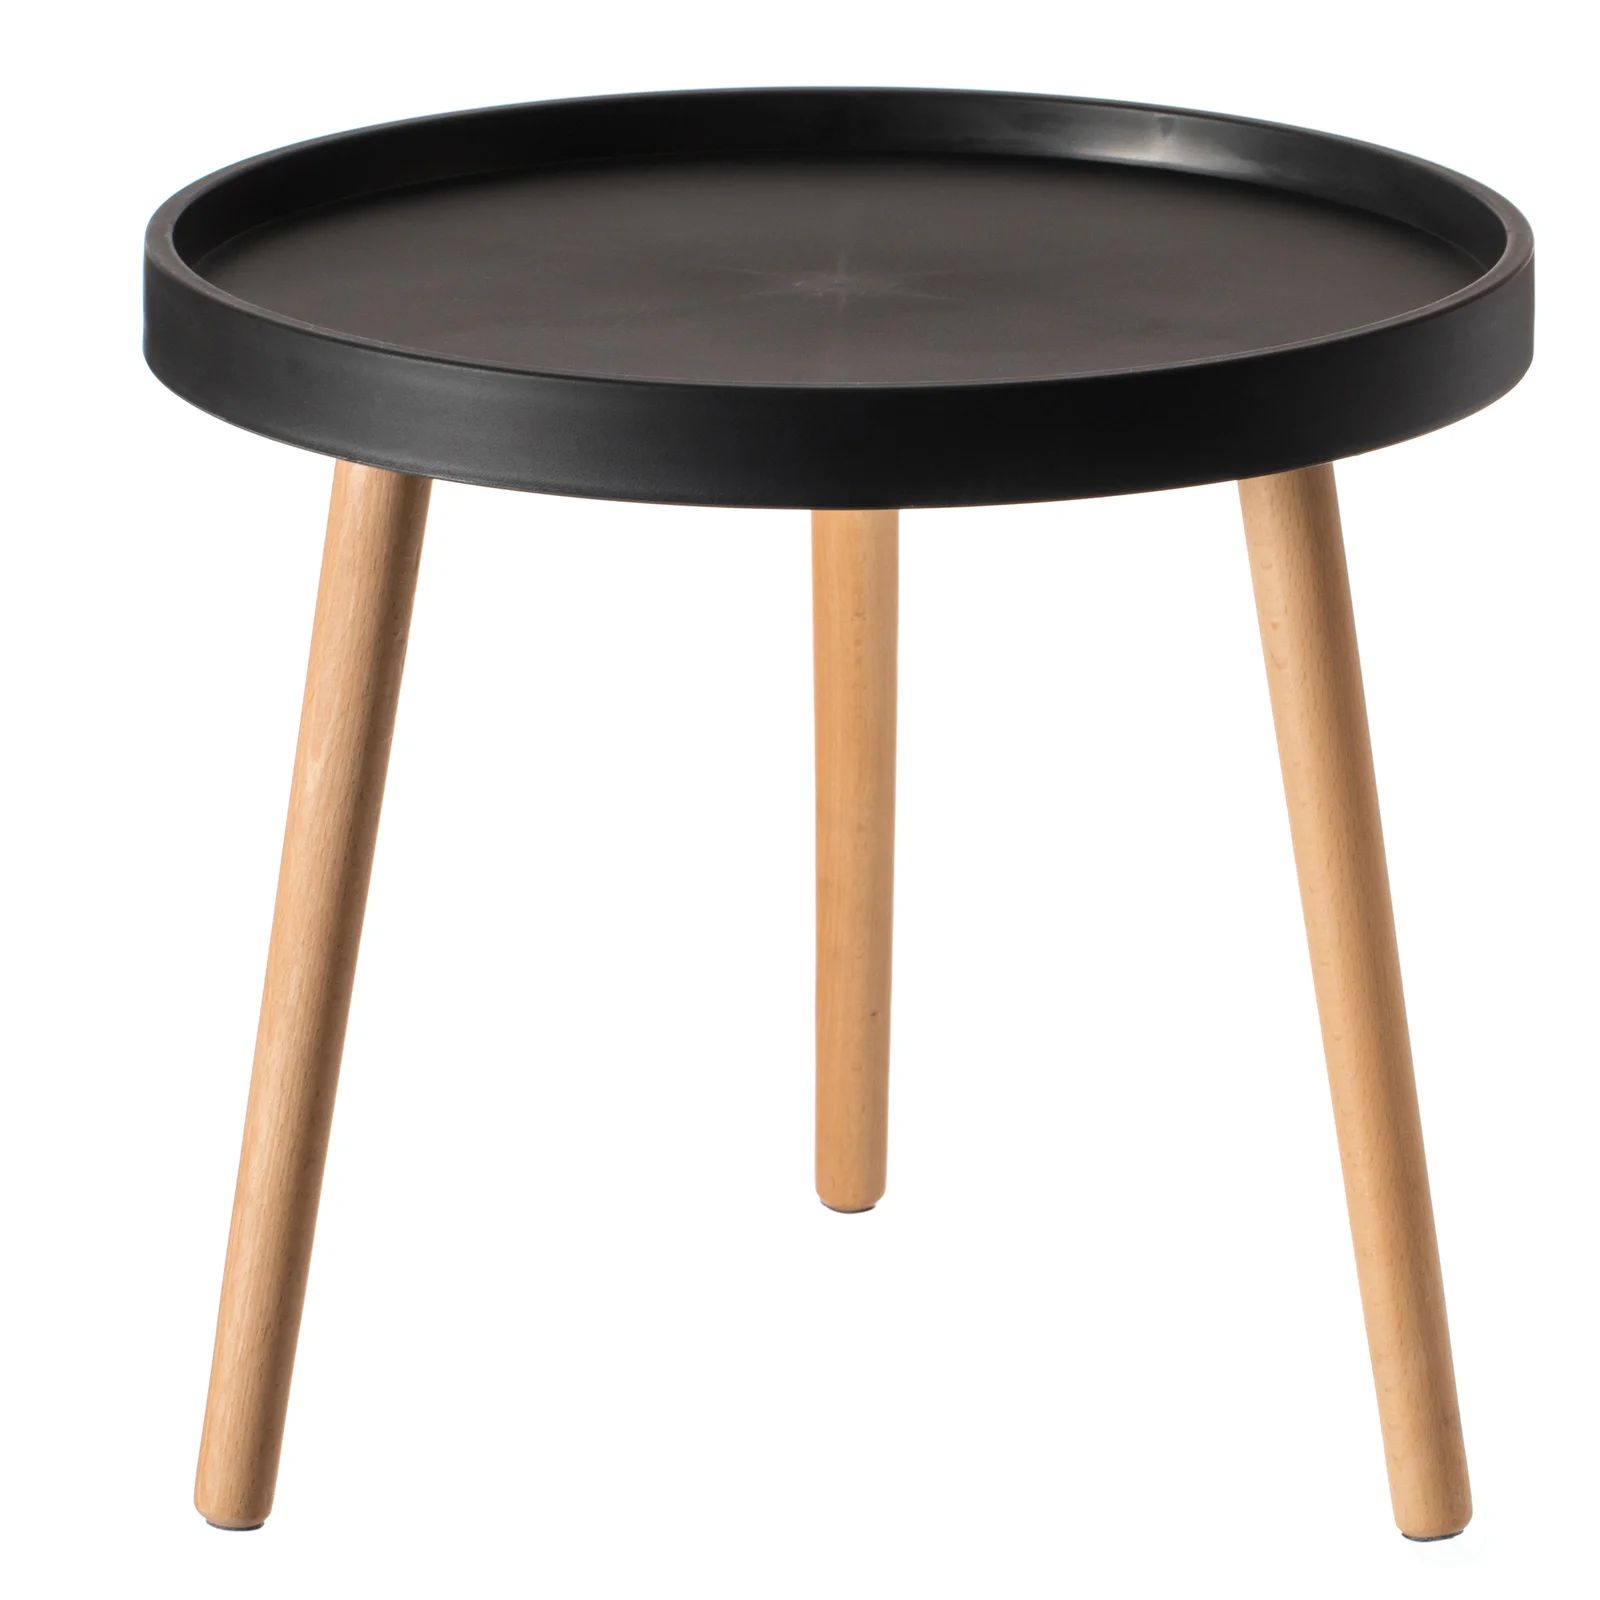 Modern Plastic Round Side Table Accent Coffee Table With Beech Wood Legs, Black | Wayfair Professional